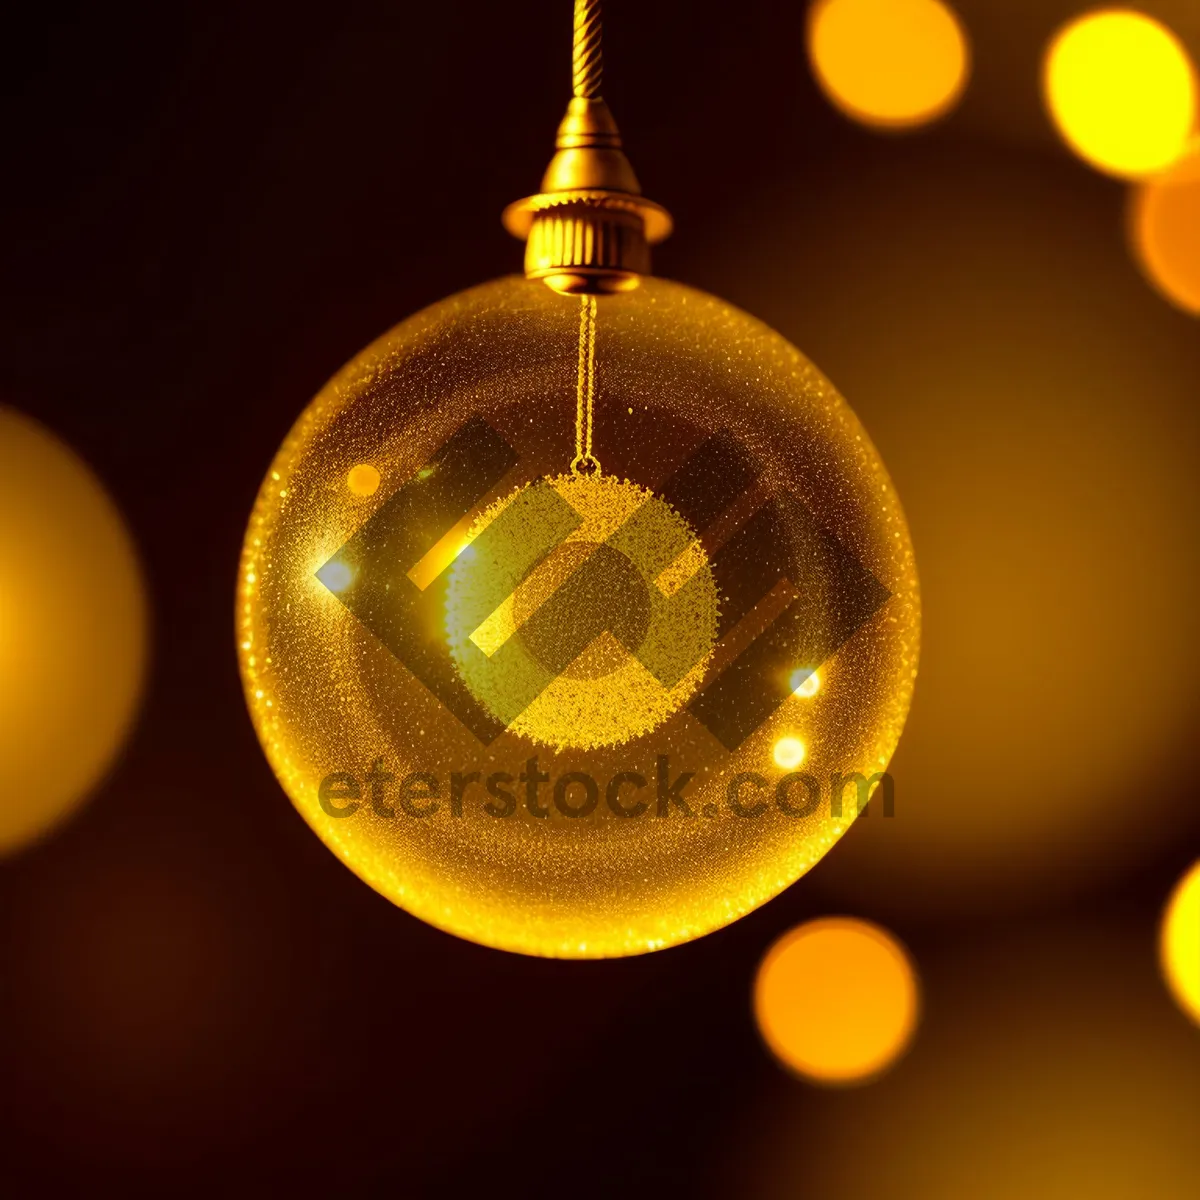 Picture of Golden Winter Wonderland Bauble Sparkling with Festive Glow